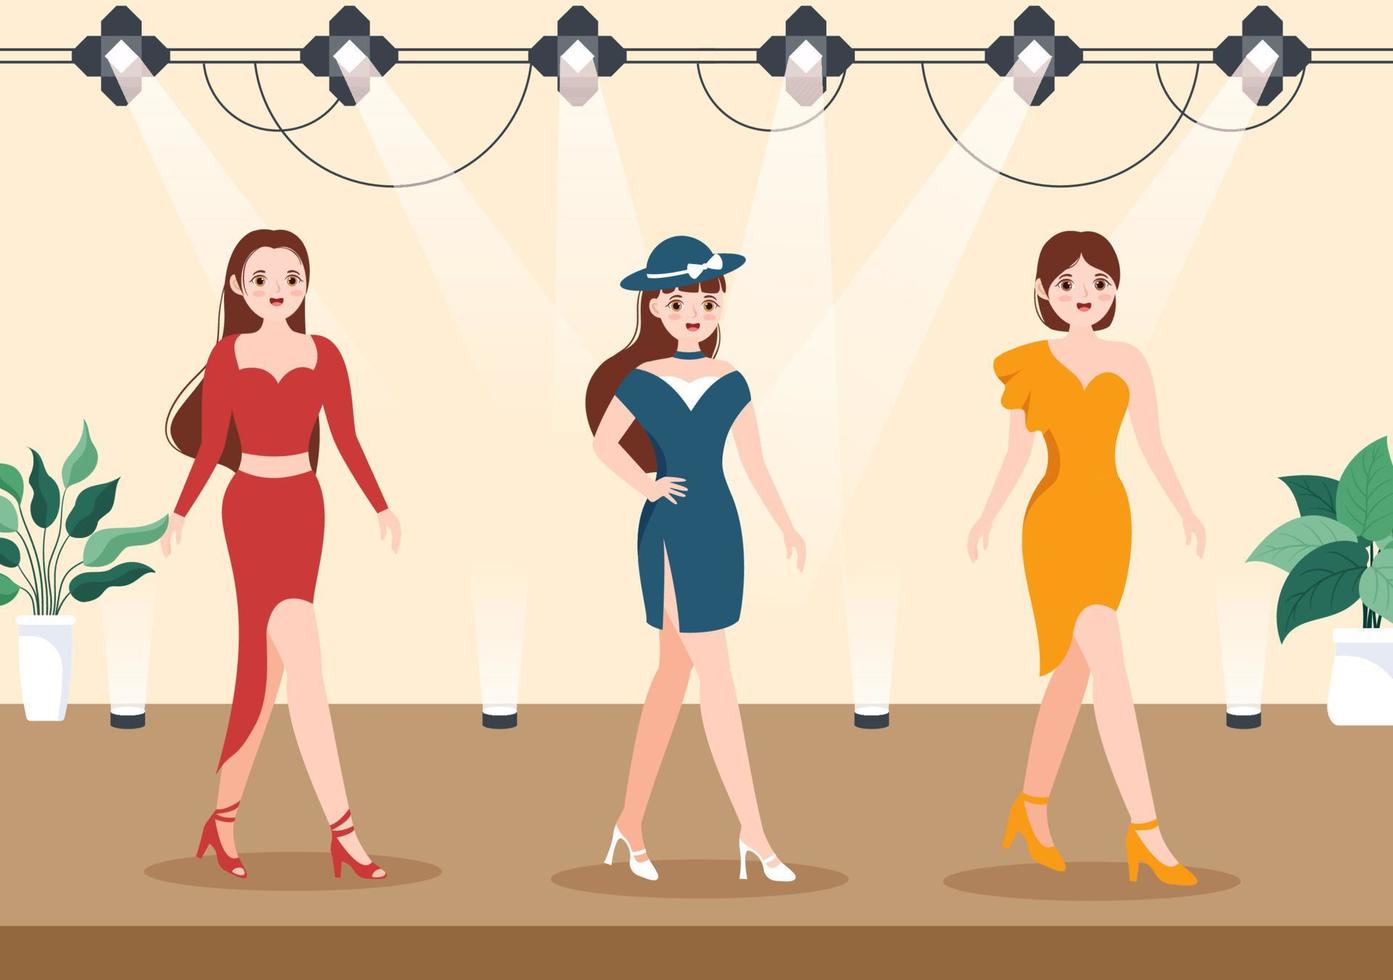 Professional Model Template Hand Drawn Cartoon Flat Illustration with Beautiful Women Models Walking on Podium in Fashion Week Event vector